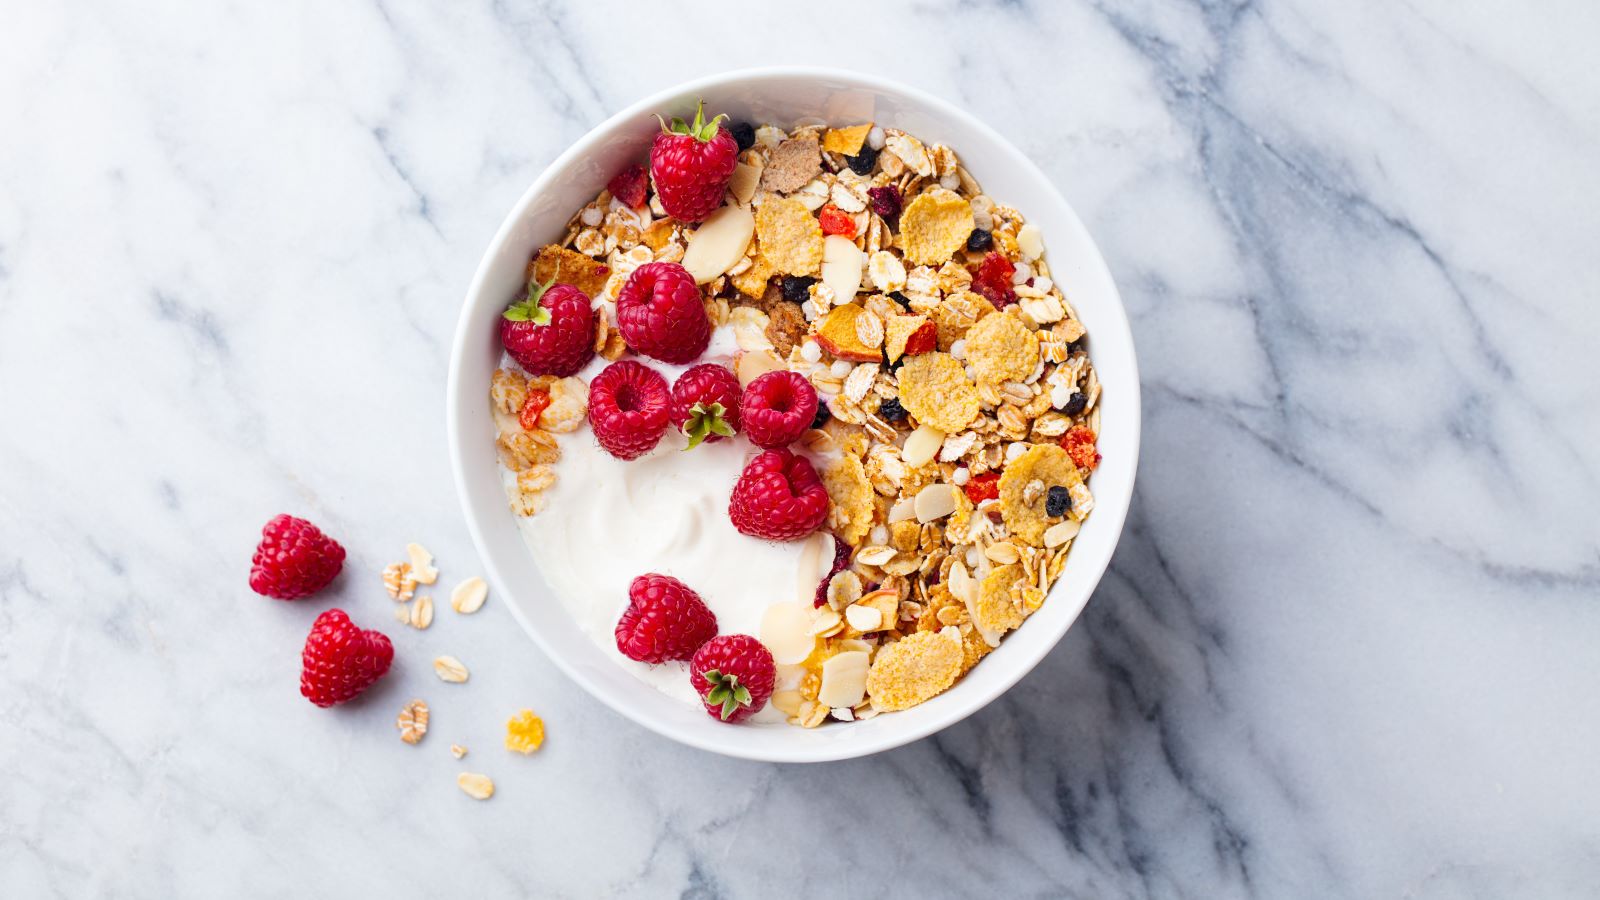 4 Tips for Choosing a Healthy Cereal